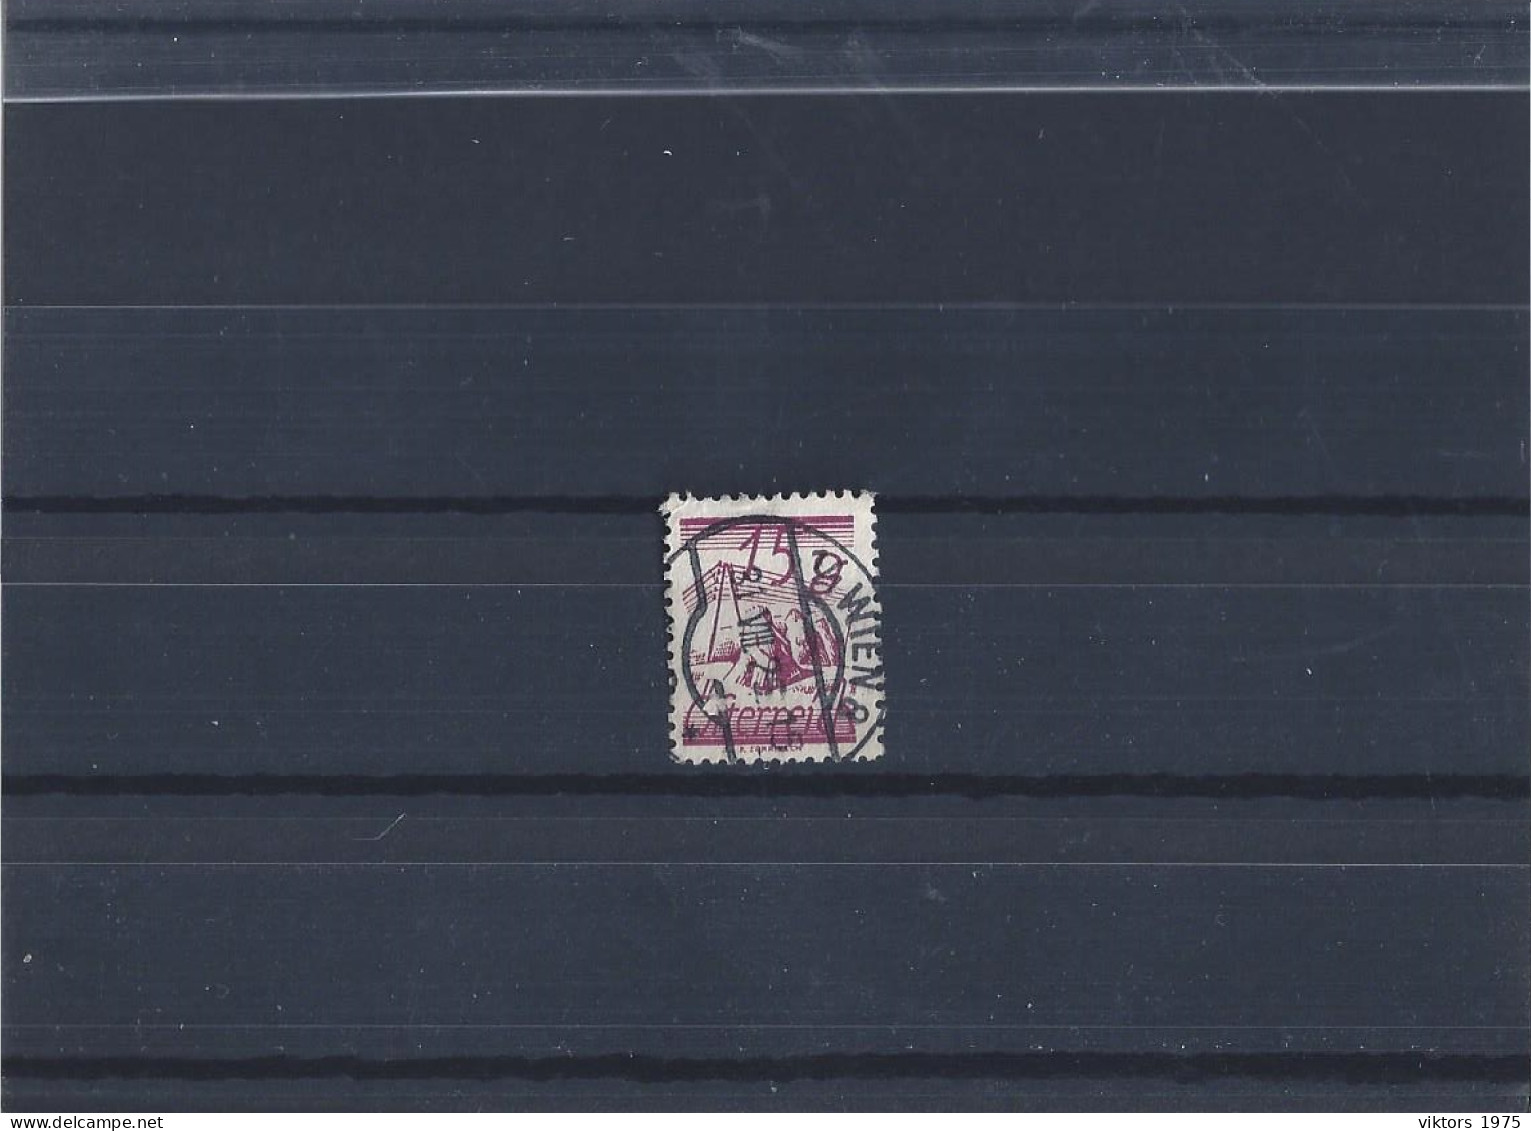 Used Stamp Nr.456 In MICHEL Catalog - Used Stamps